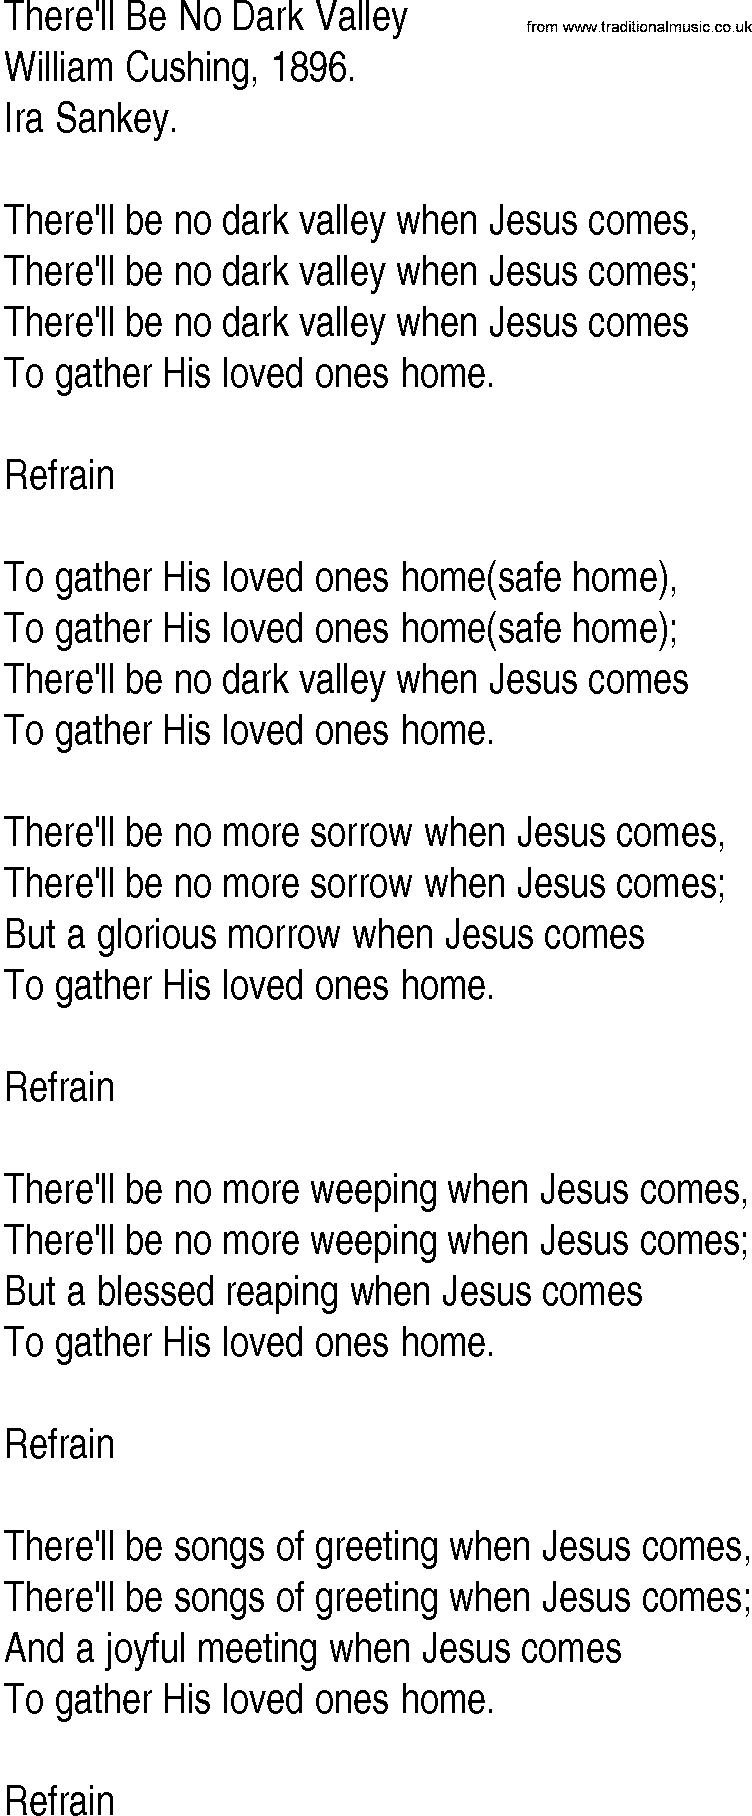 Hymn and Gospel Song: There'll Be No Dark Valley by William Cushing lyrics